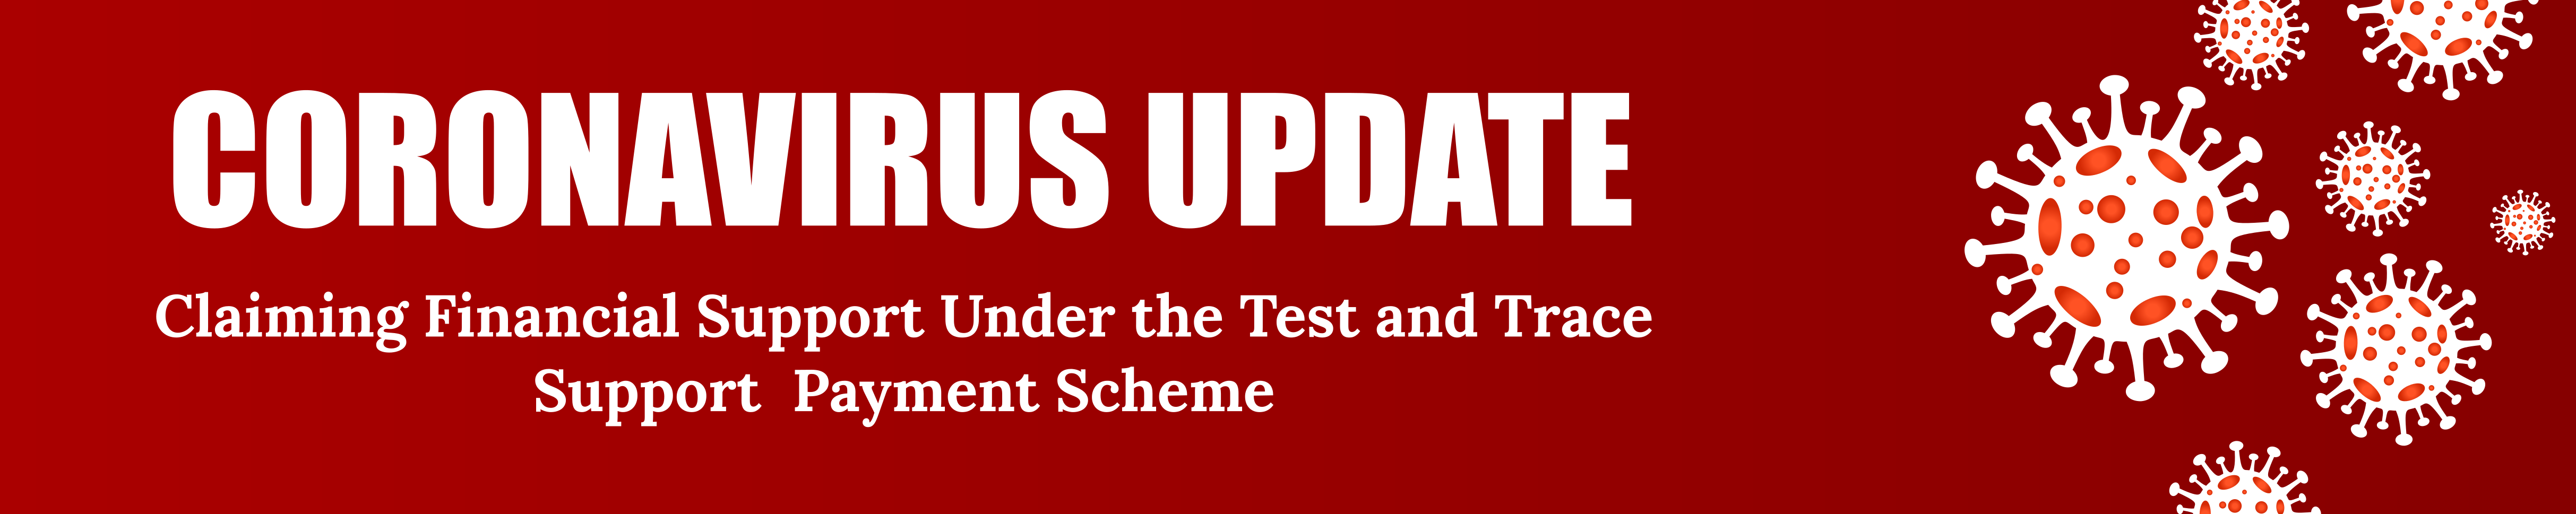 Claiming Financial Support Under Test and Trace Support Payment Scheme